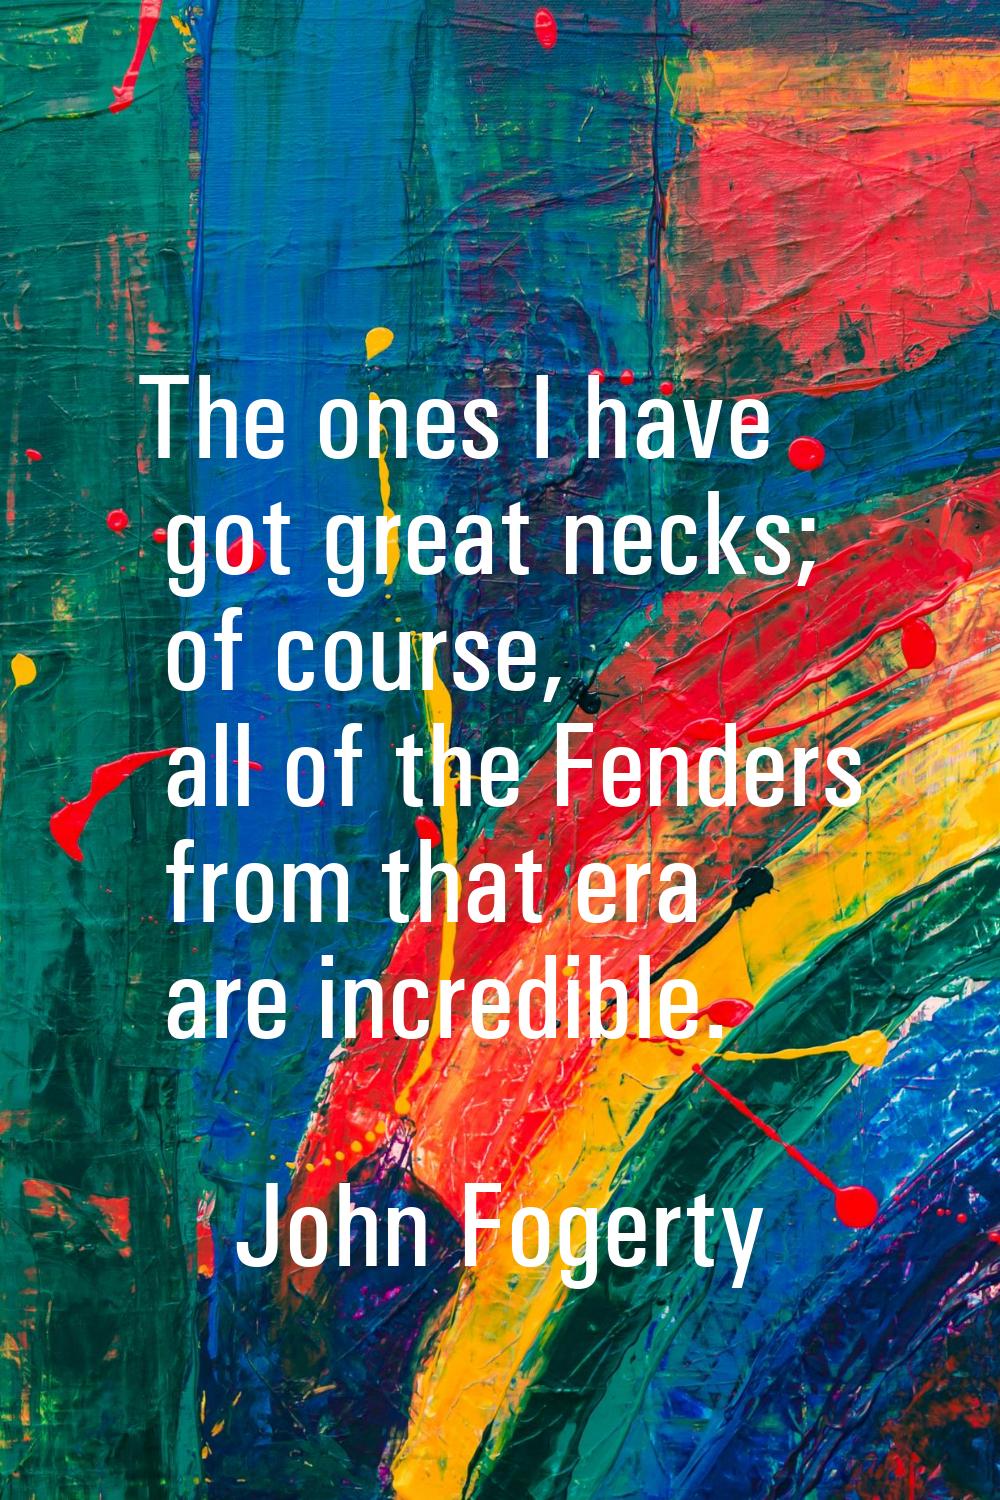 The ones I have got great necks; of course, all of the Fenders from that era are incredible.